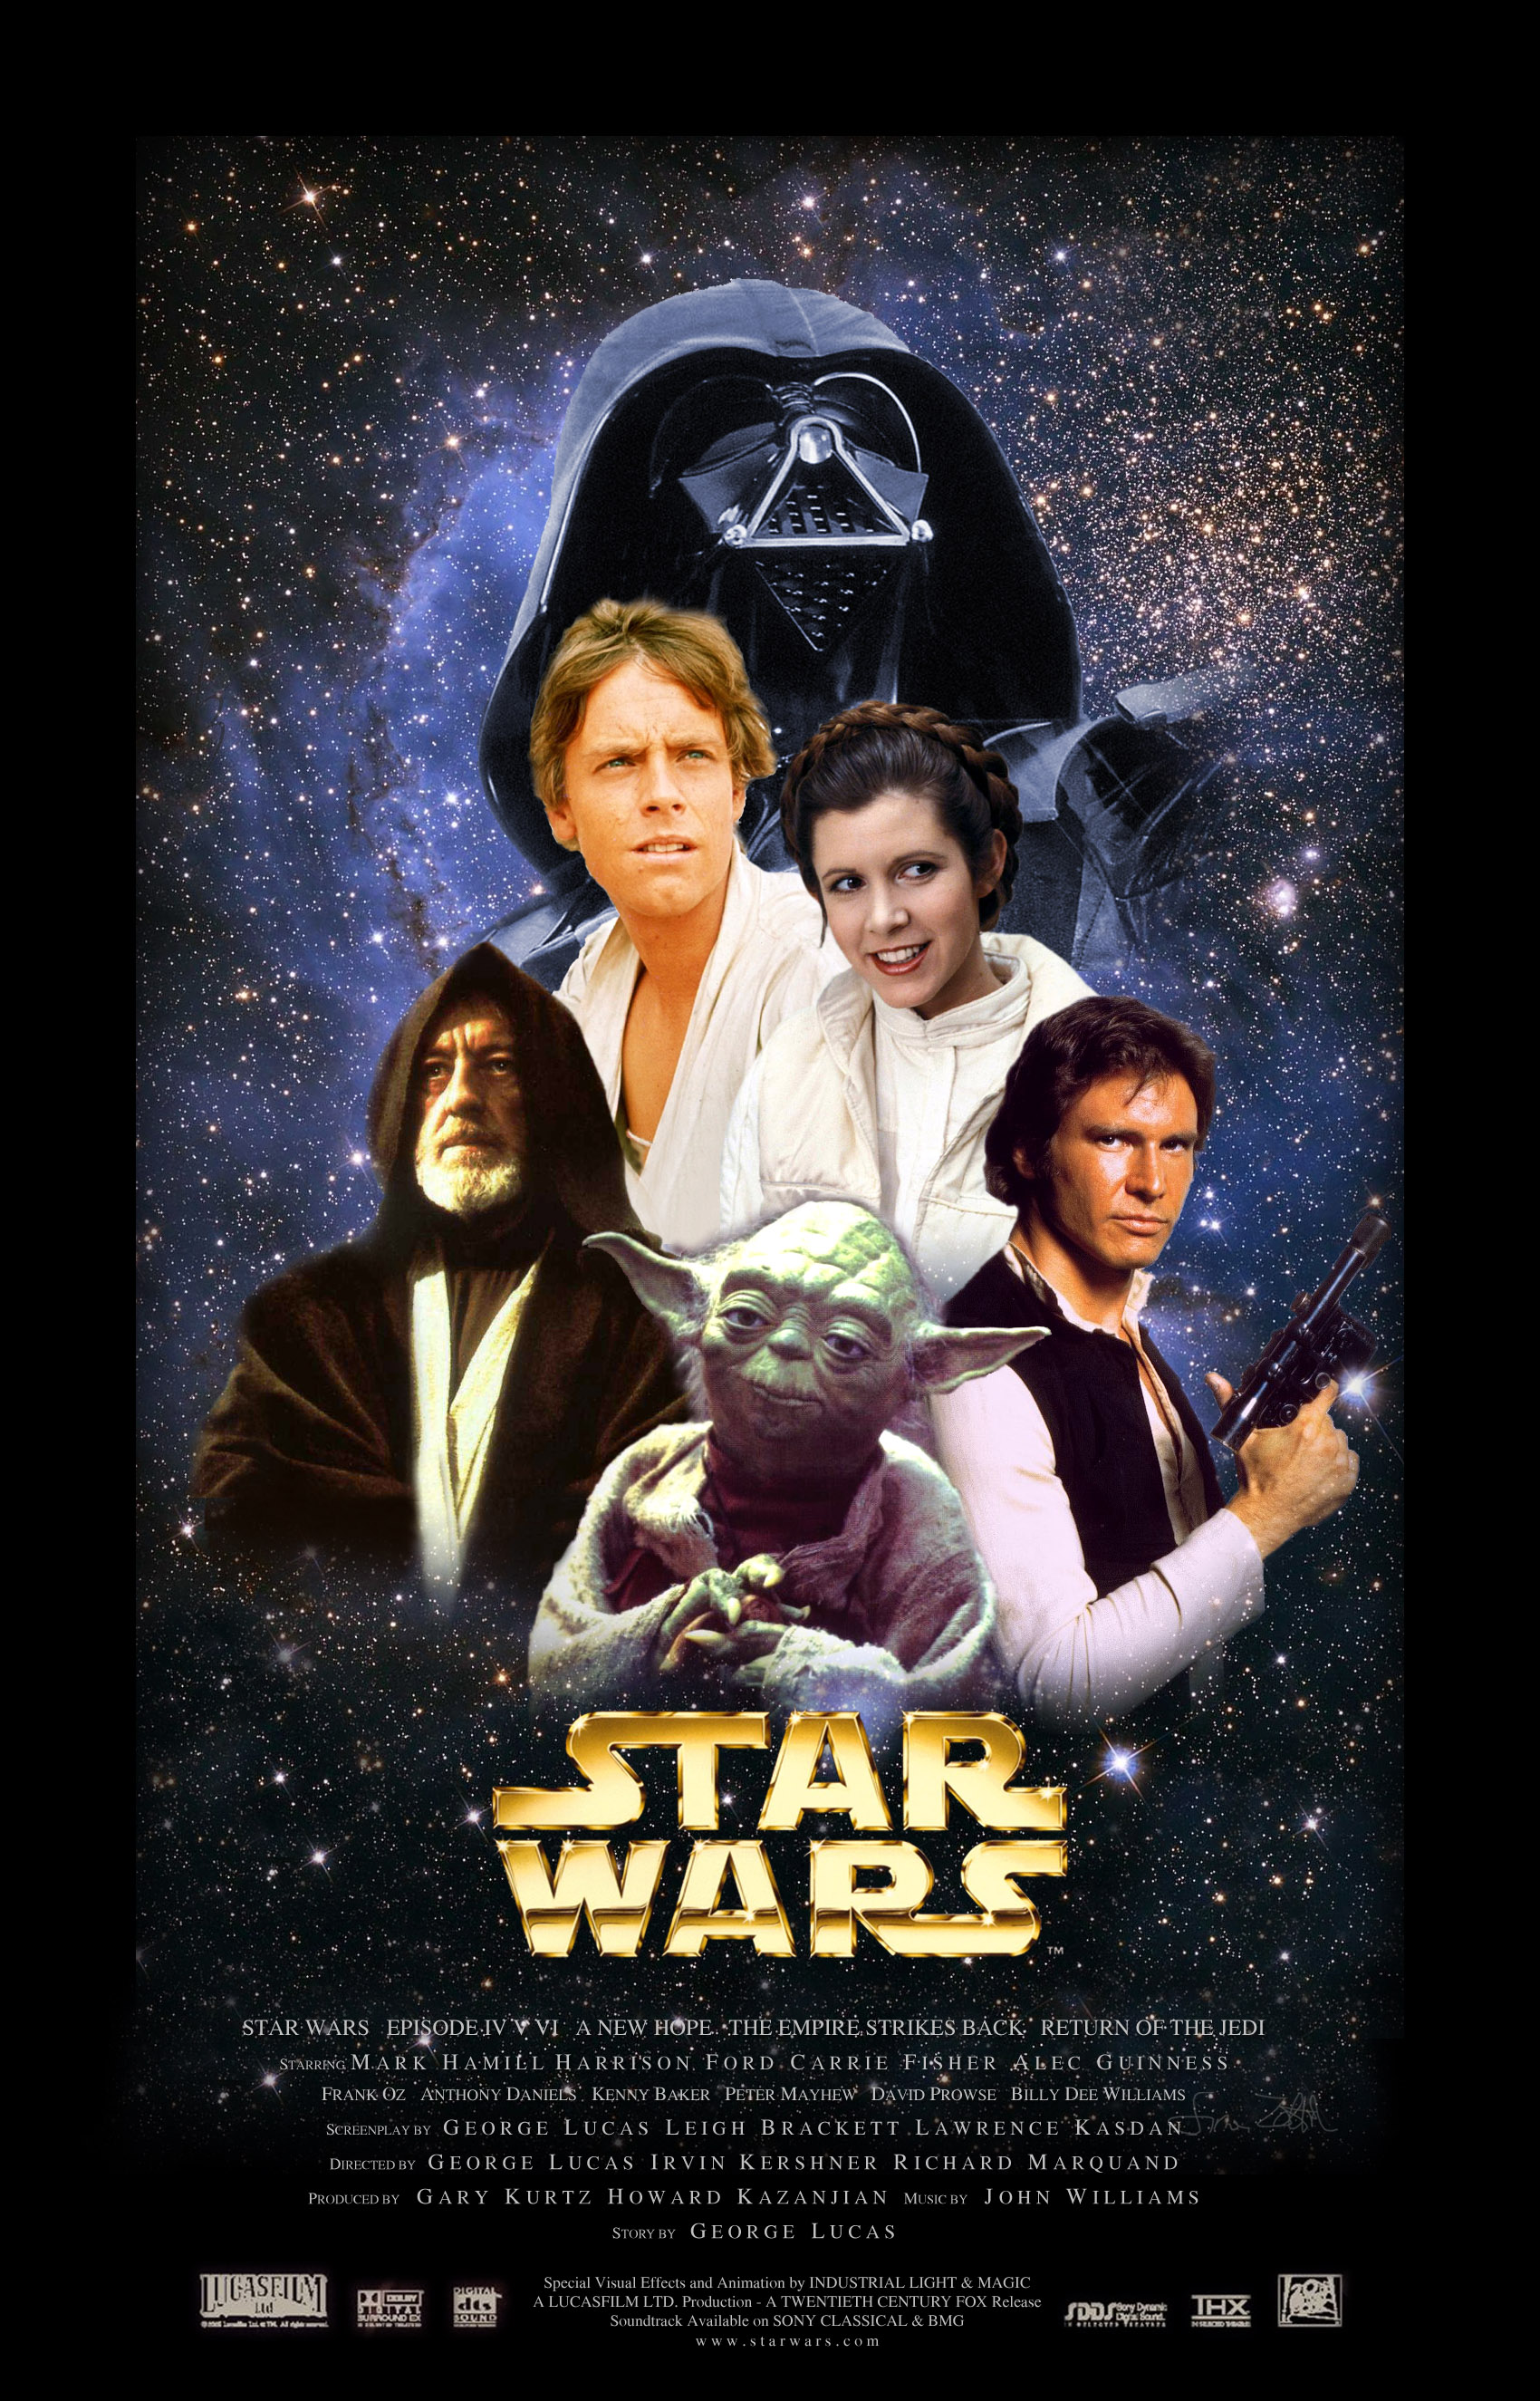 Episode Iii Revenge Of The Sith Posters Two Trilogy